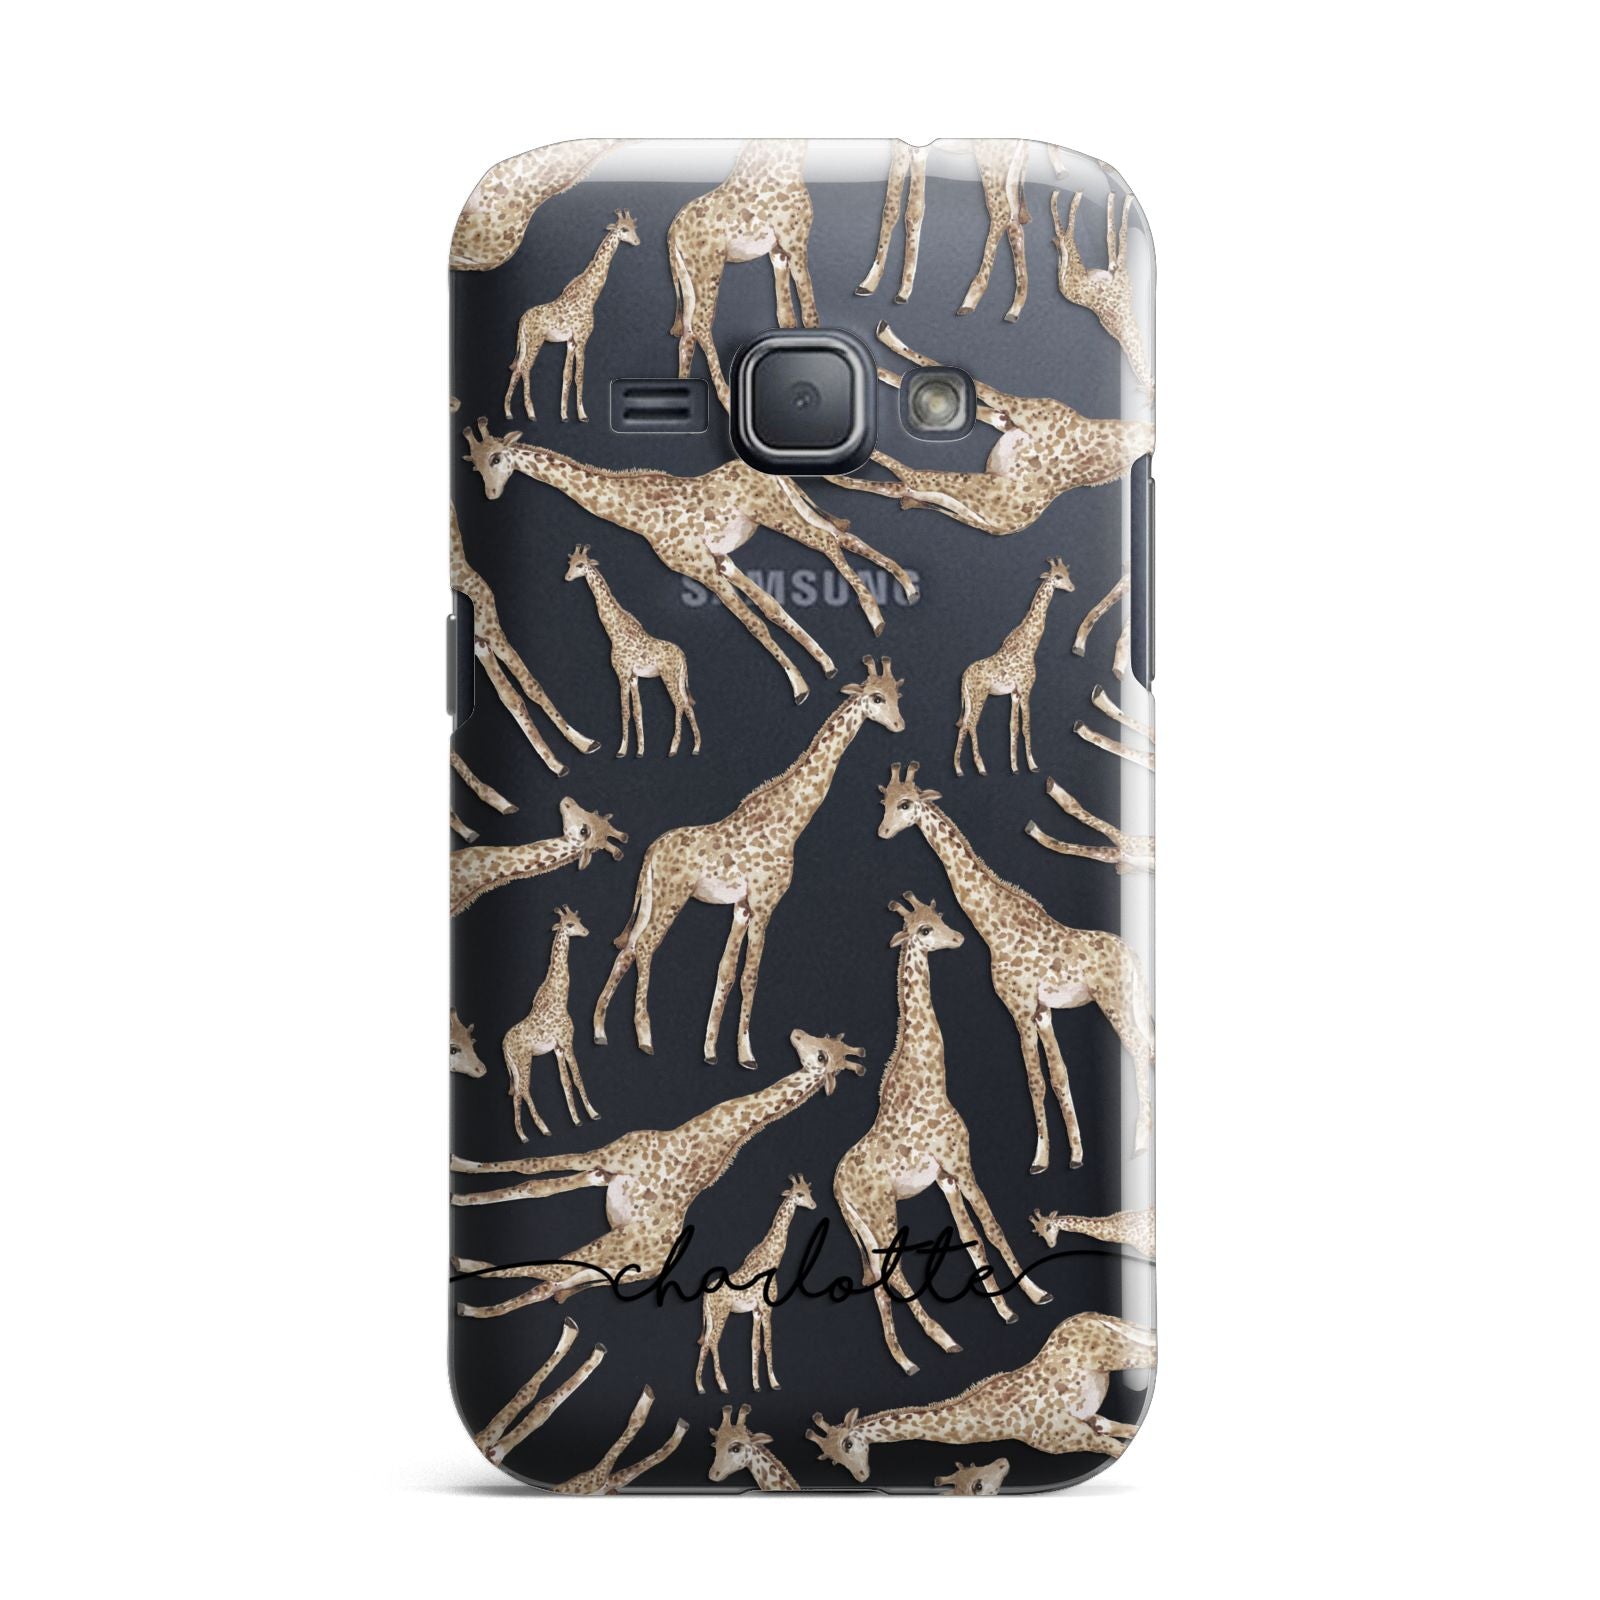 Personalised Giraffes with Name Samsung Galaxy J1 2016 Case